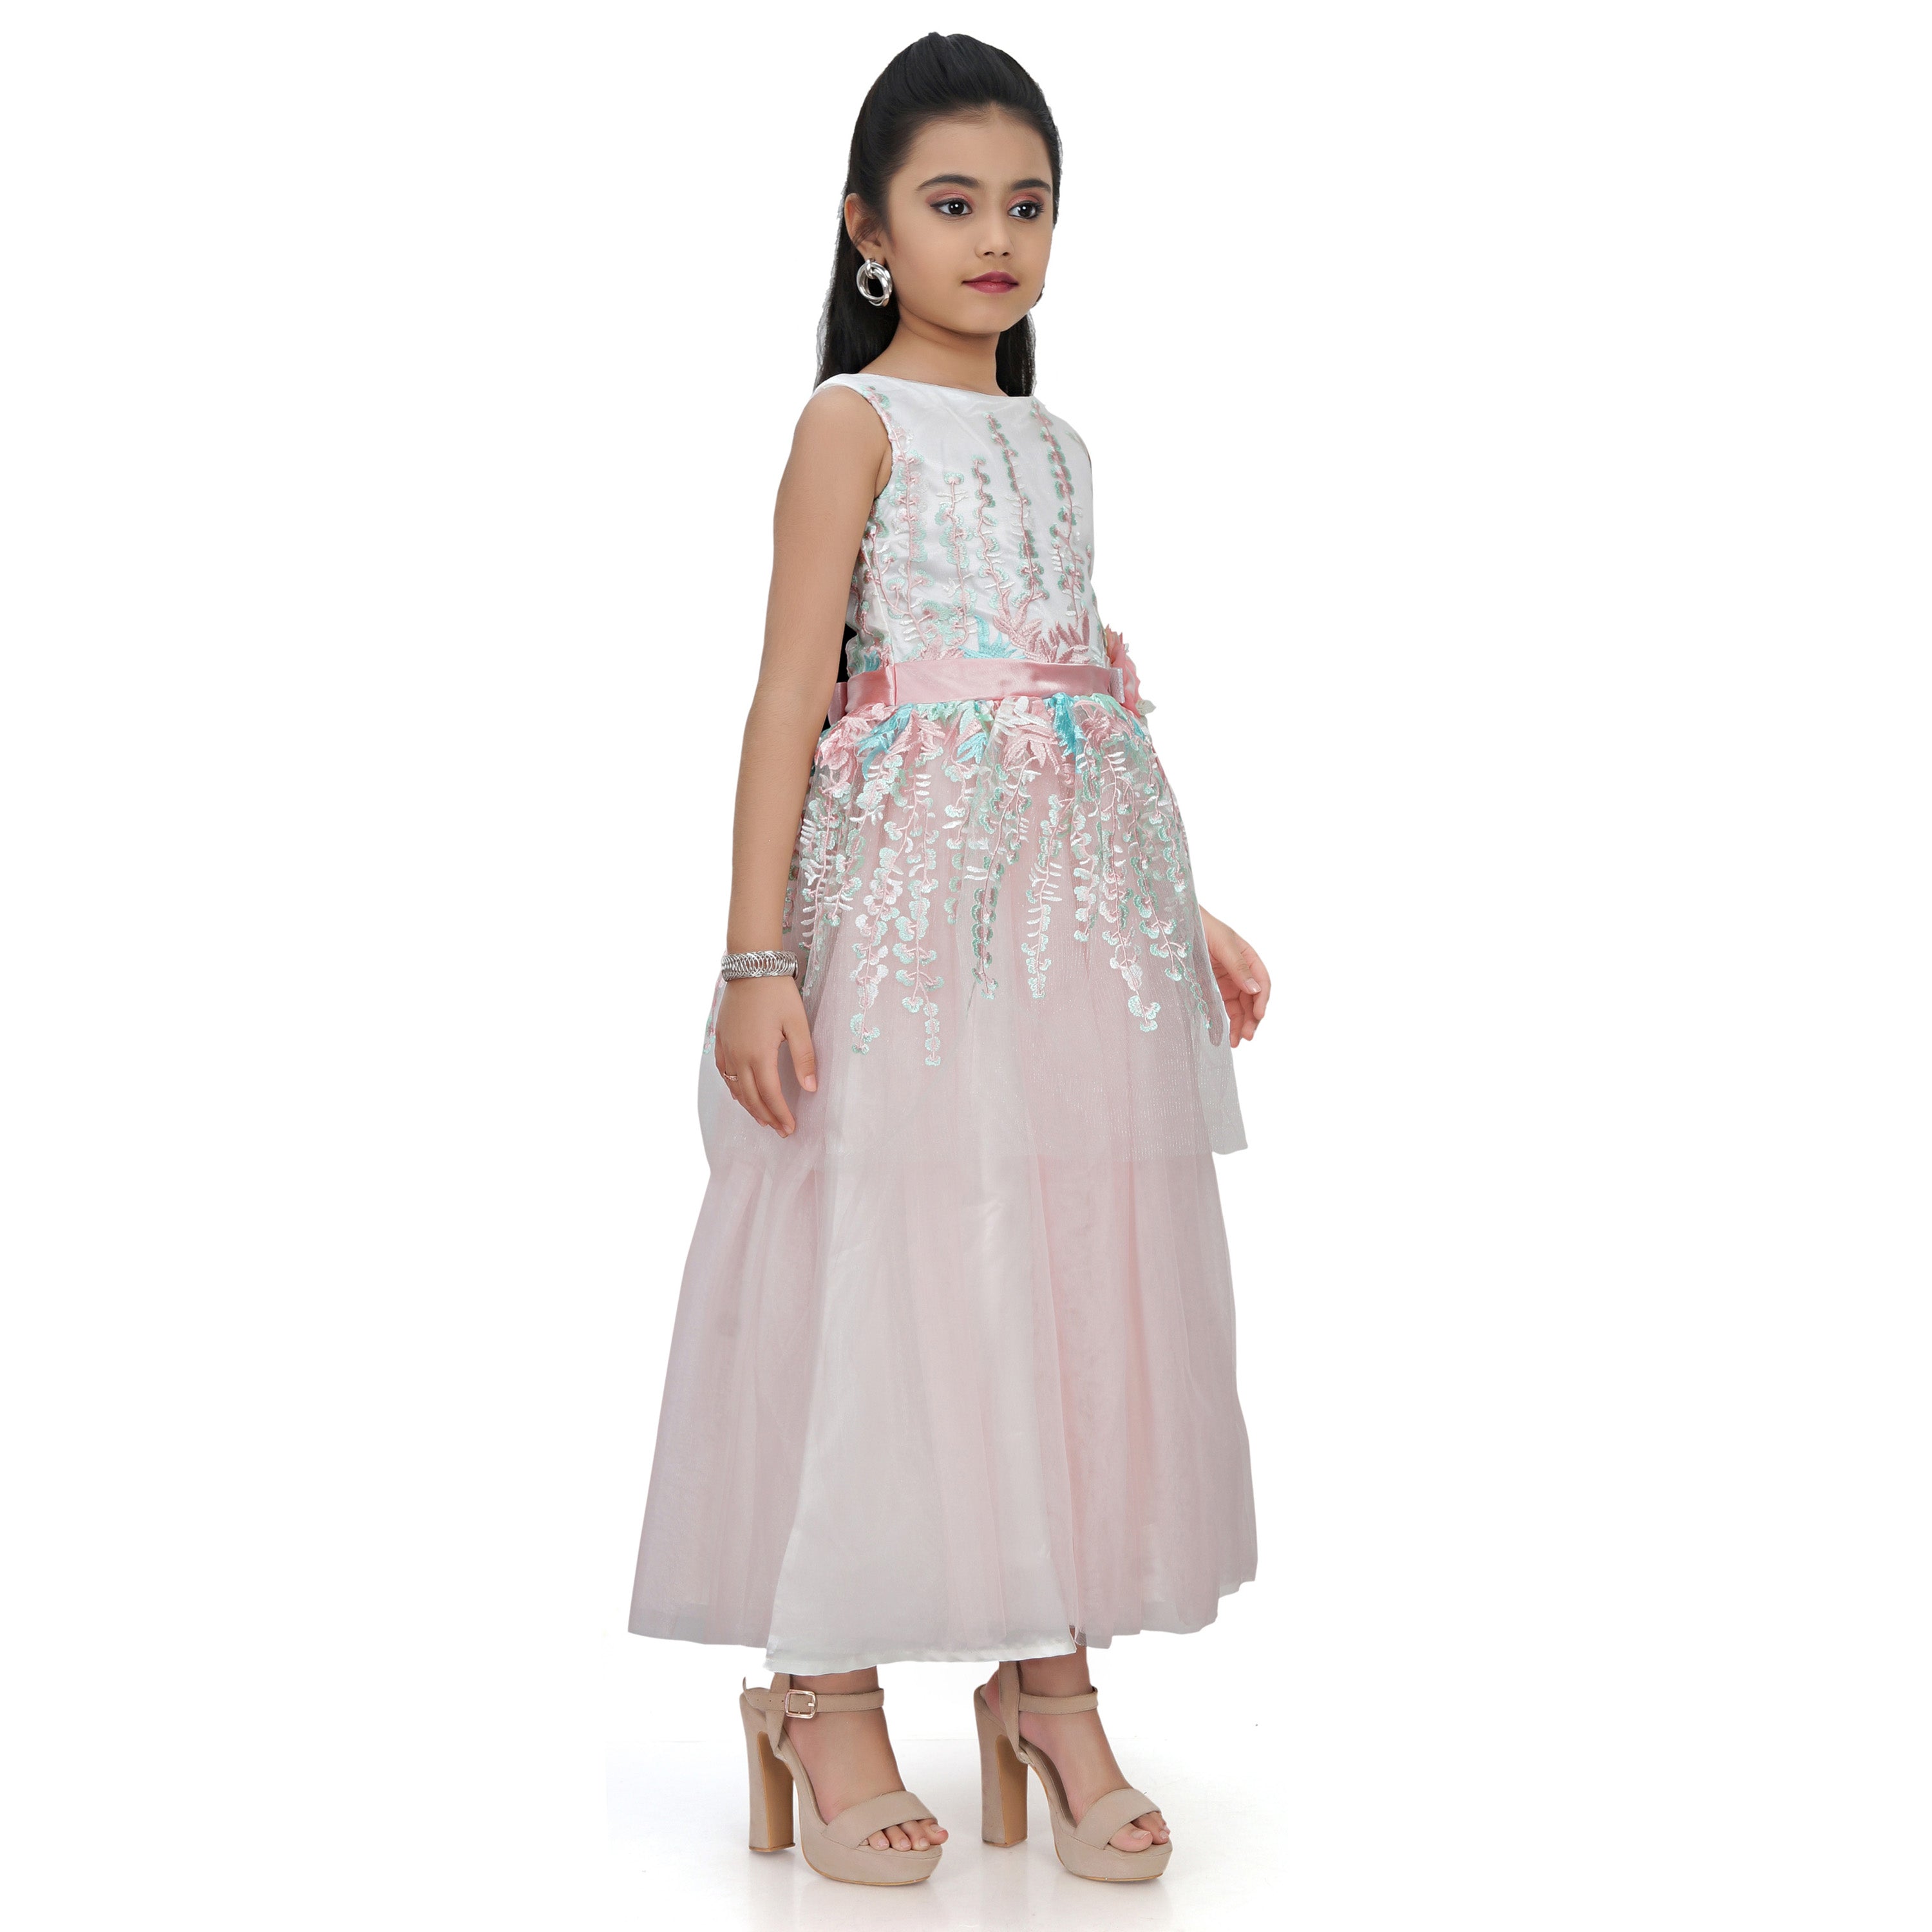 Sky Pink Printed Woven Fit And Flare Dress With Sequins With A Flower Brooch.